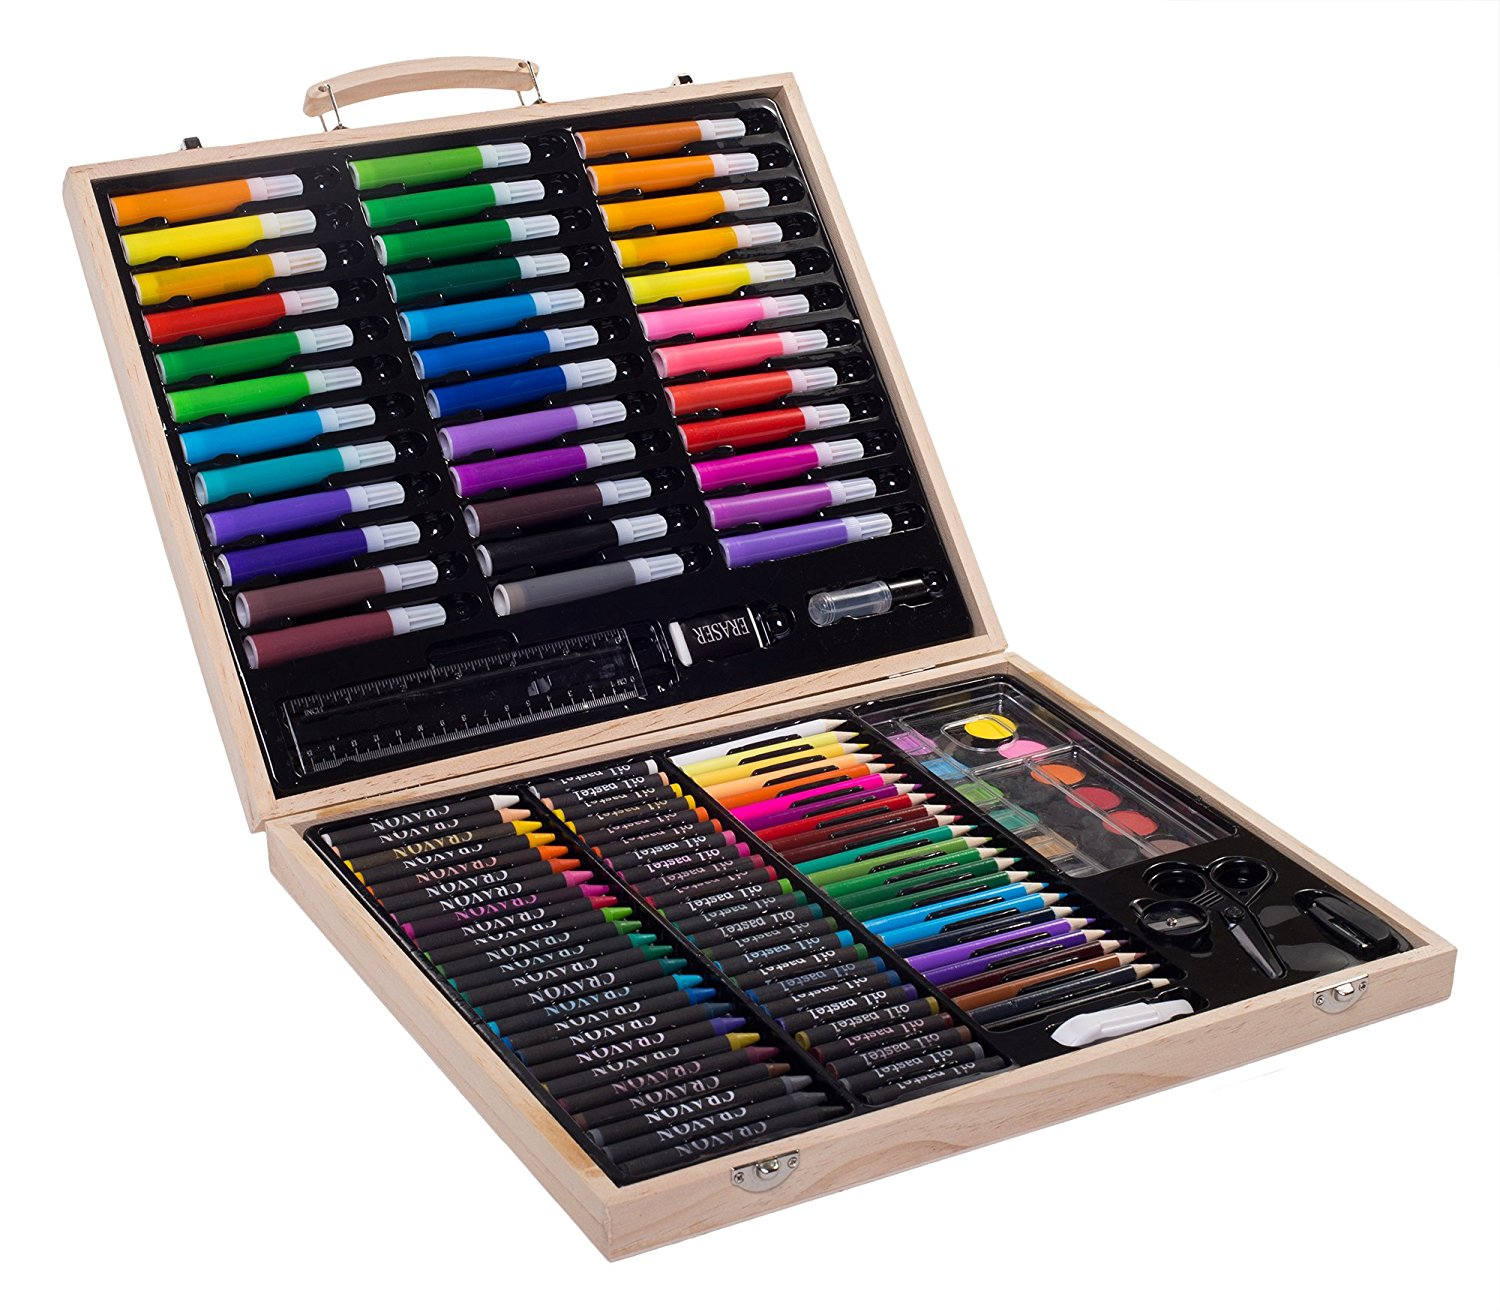 Darice 80-Piece Deluxe Art Set – Art Supplies for Drawing, Painting and  More in a Compact, Portable Case - Makes a Great Gift for Beginner and  Serious